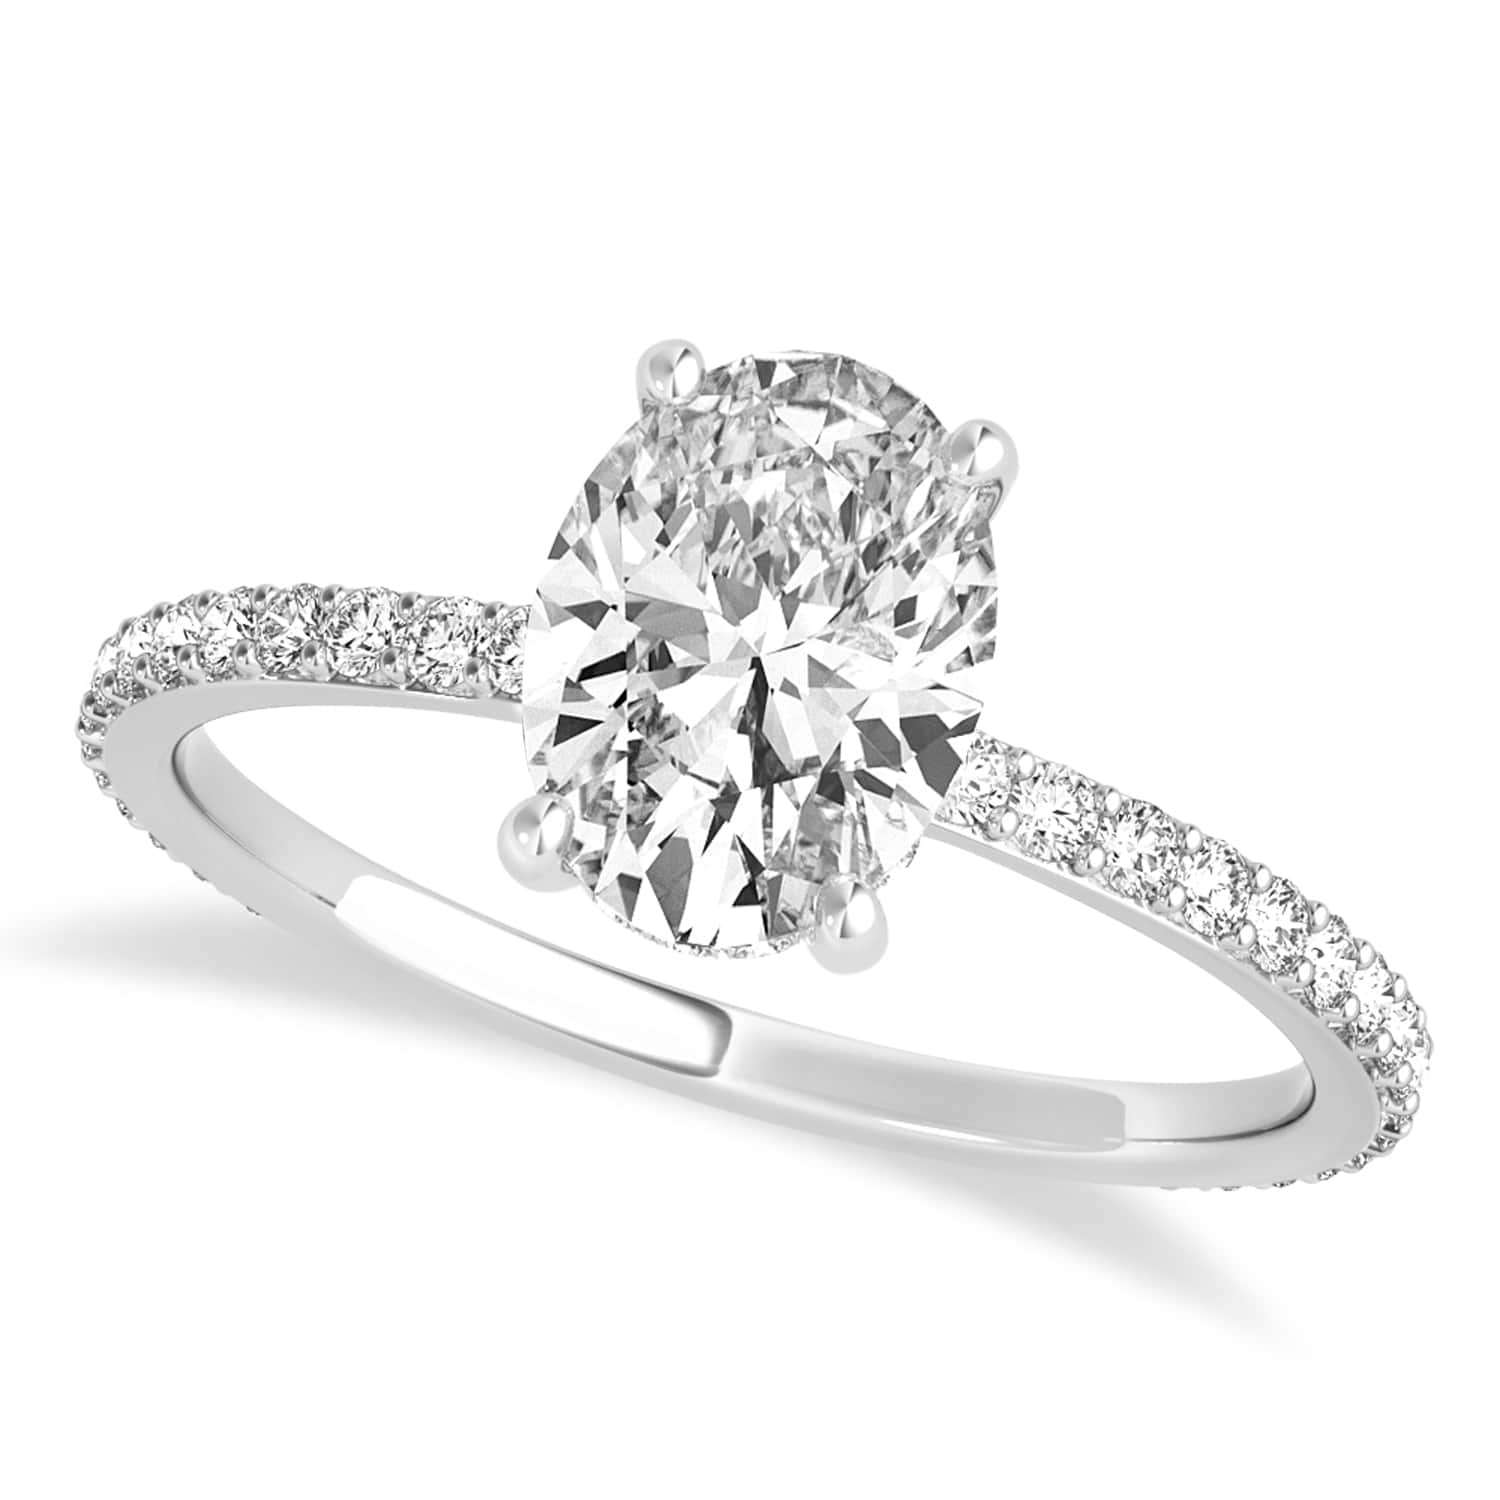 Oval Lab Grown Diamond Hidden Halo Engagement Ring 18k White Gold (2.50ct)